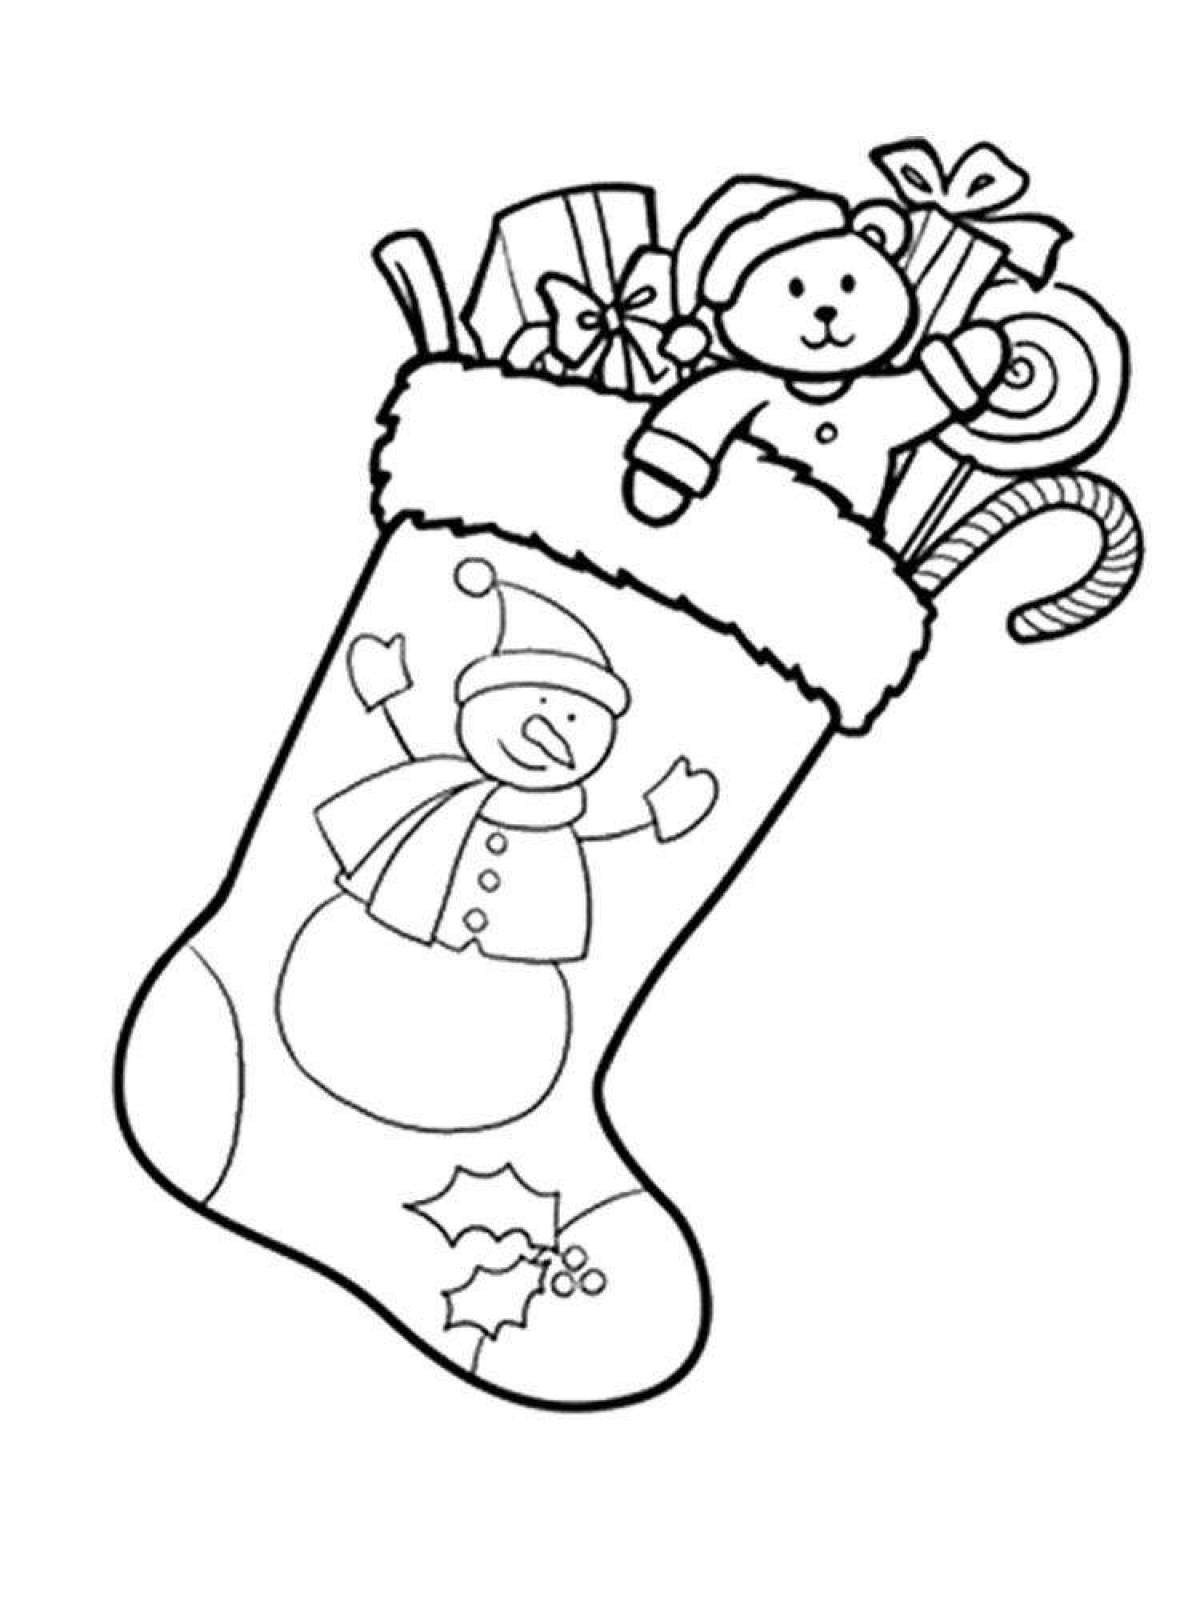 A fascinating coloring of the Christmas boot